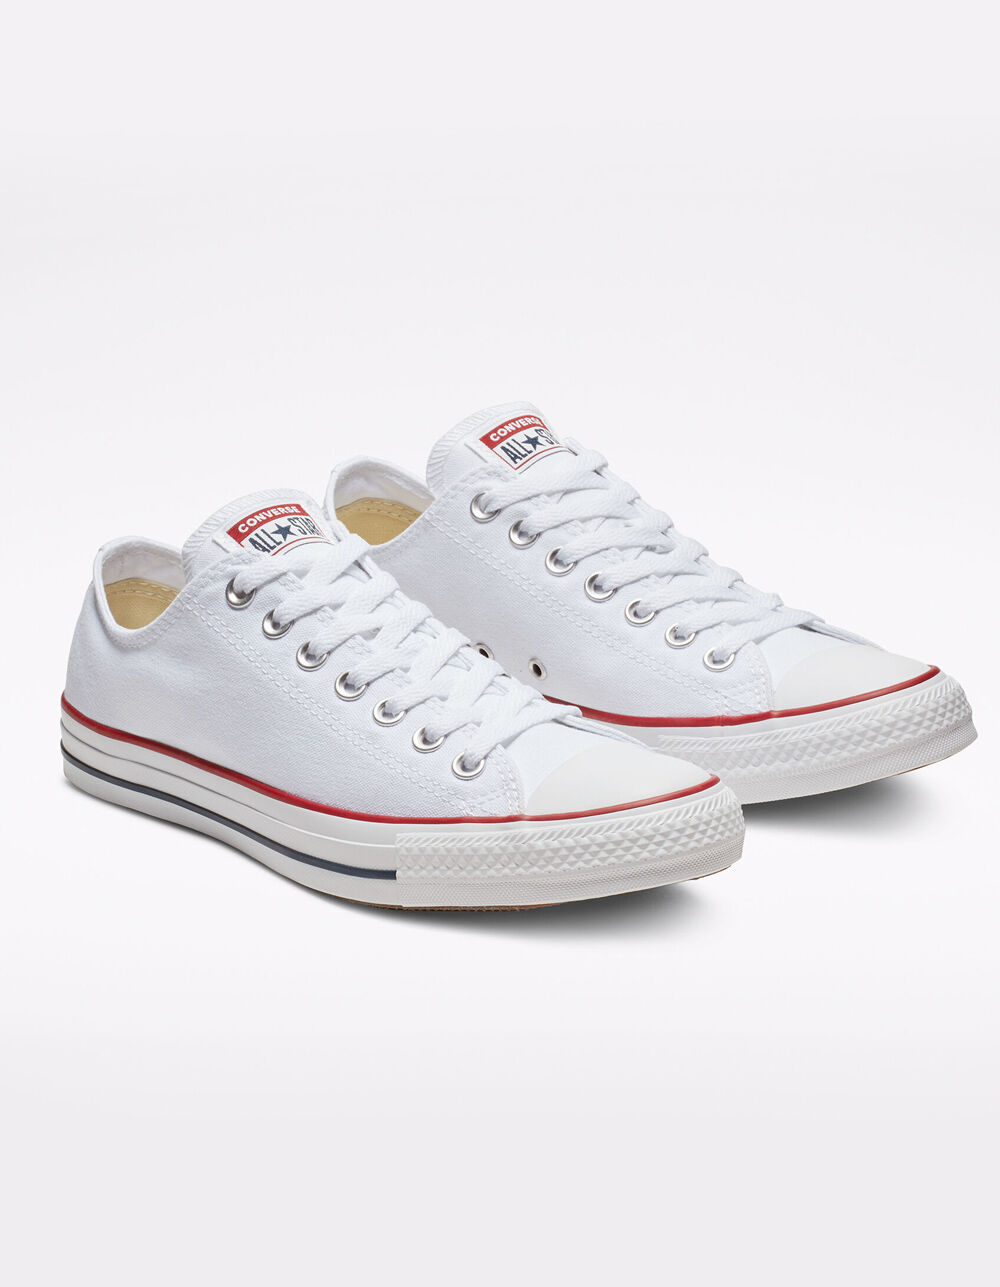 Converse Chuck Taylor All Star White Low | Tillys